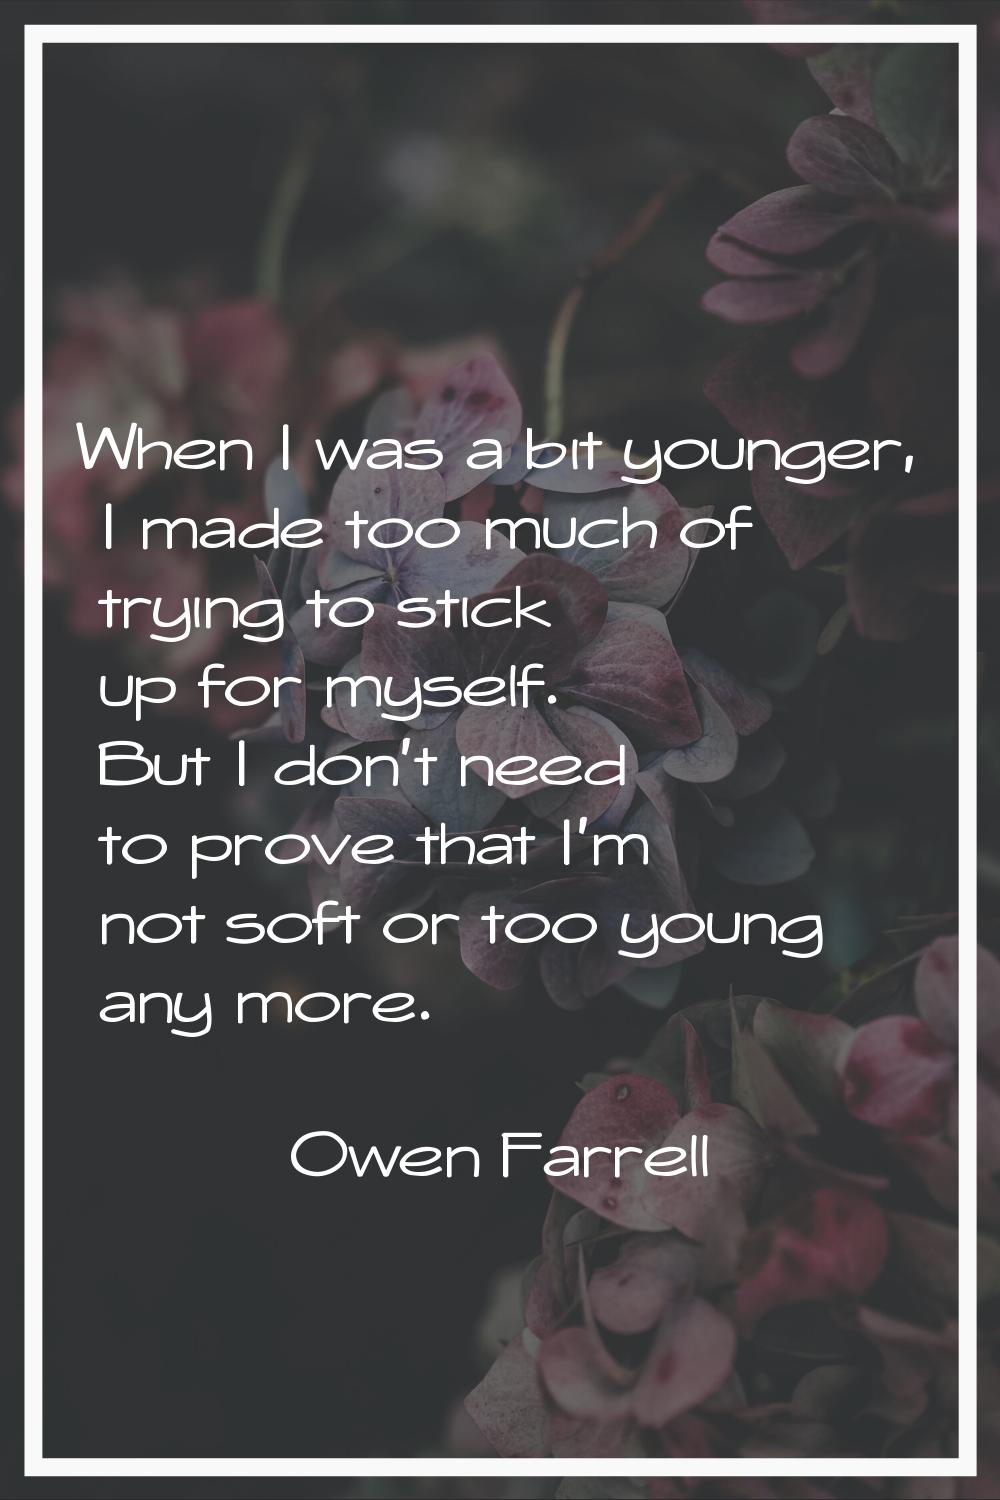 When I was a bit younger, I made too much of trying to stick up for myself. But I don't need to pro